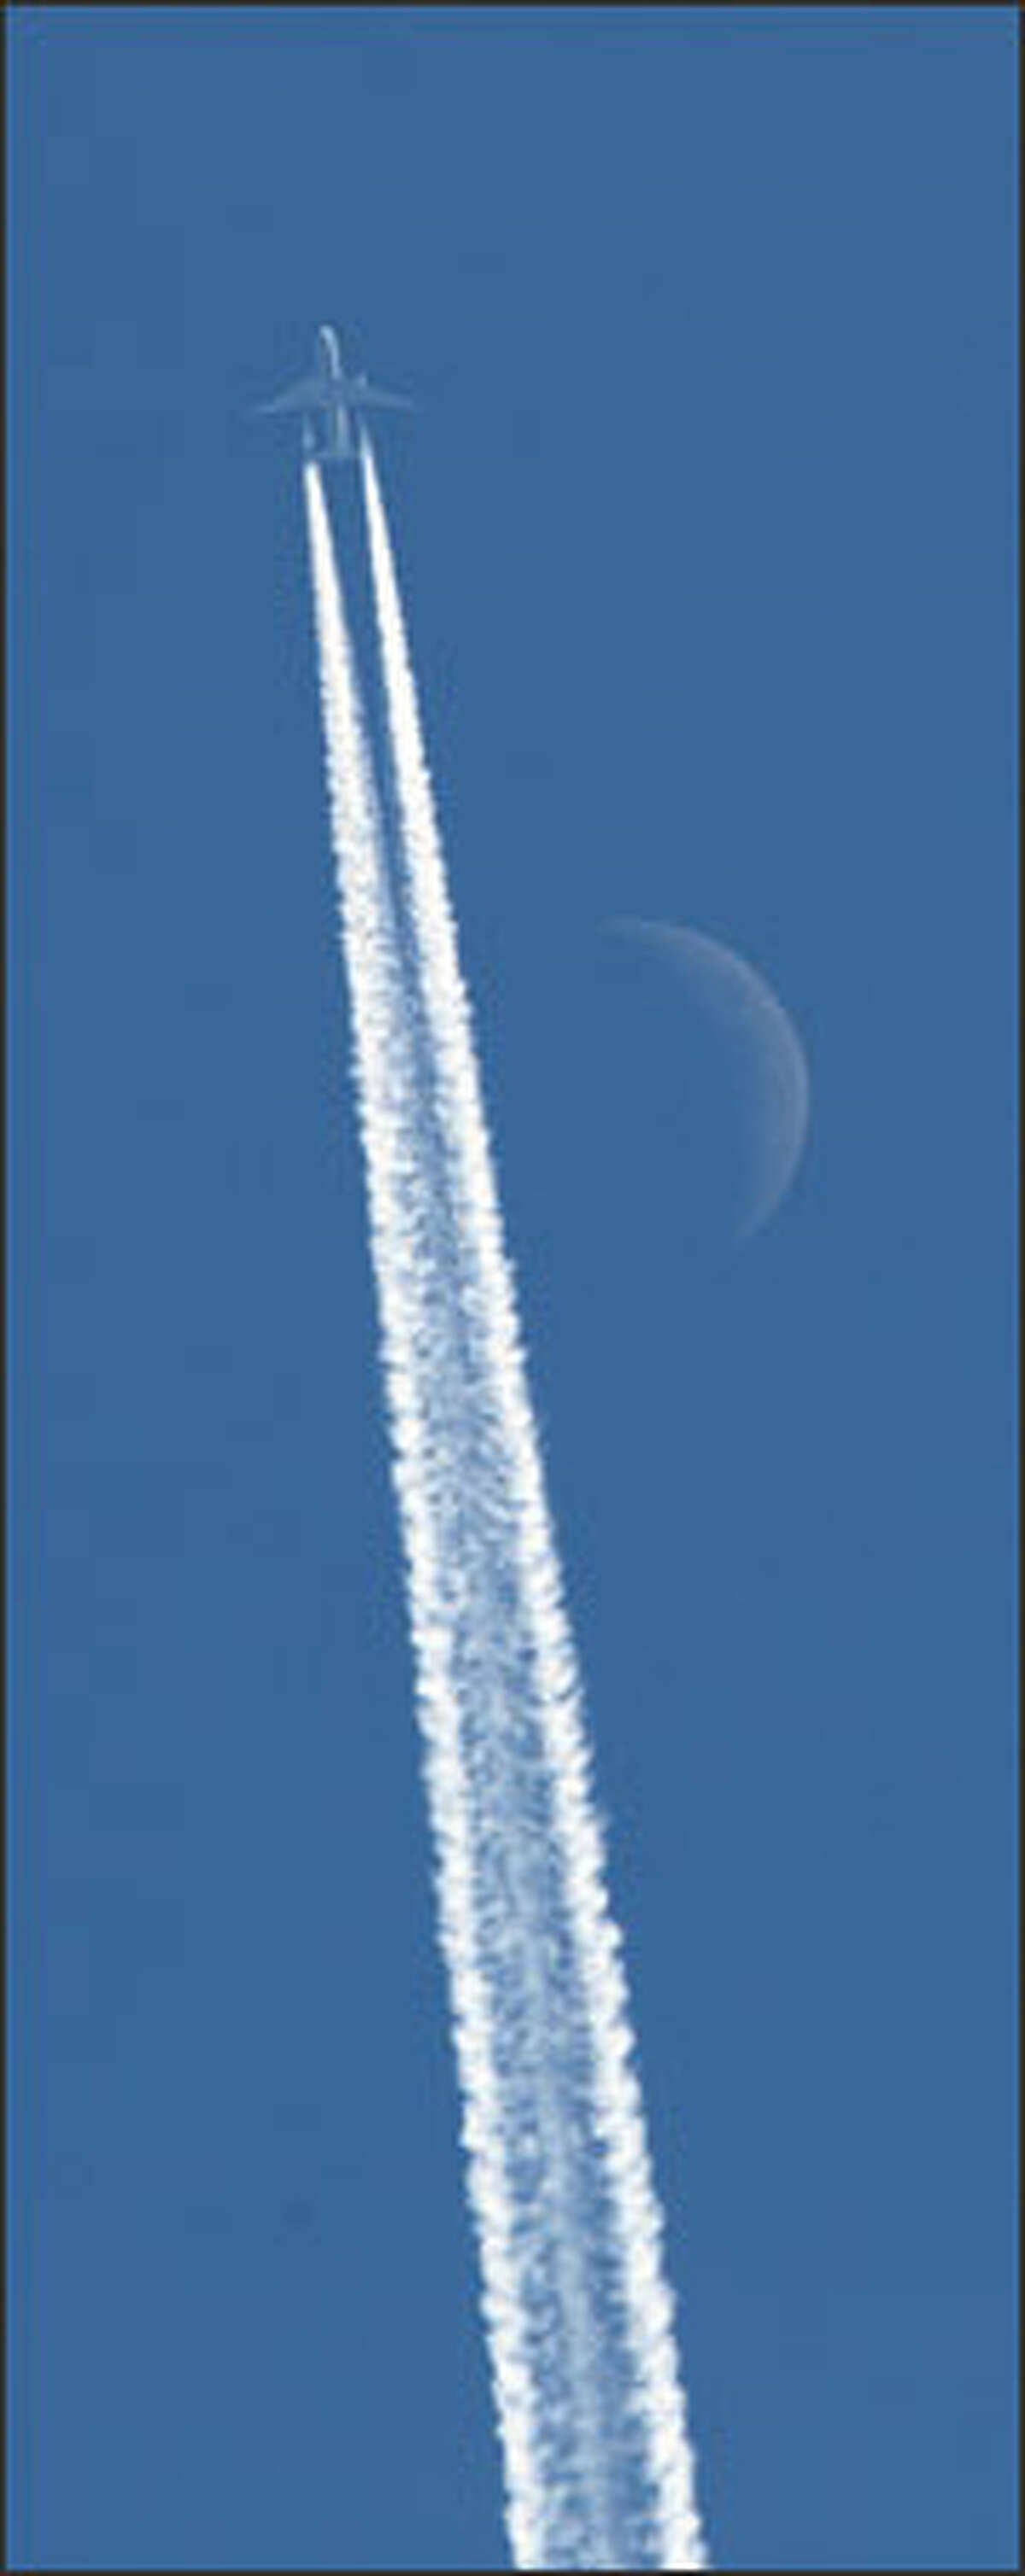 With a faint moon above, a jet leaves its contrail across another brilliant blue sky over Western Washington.